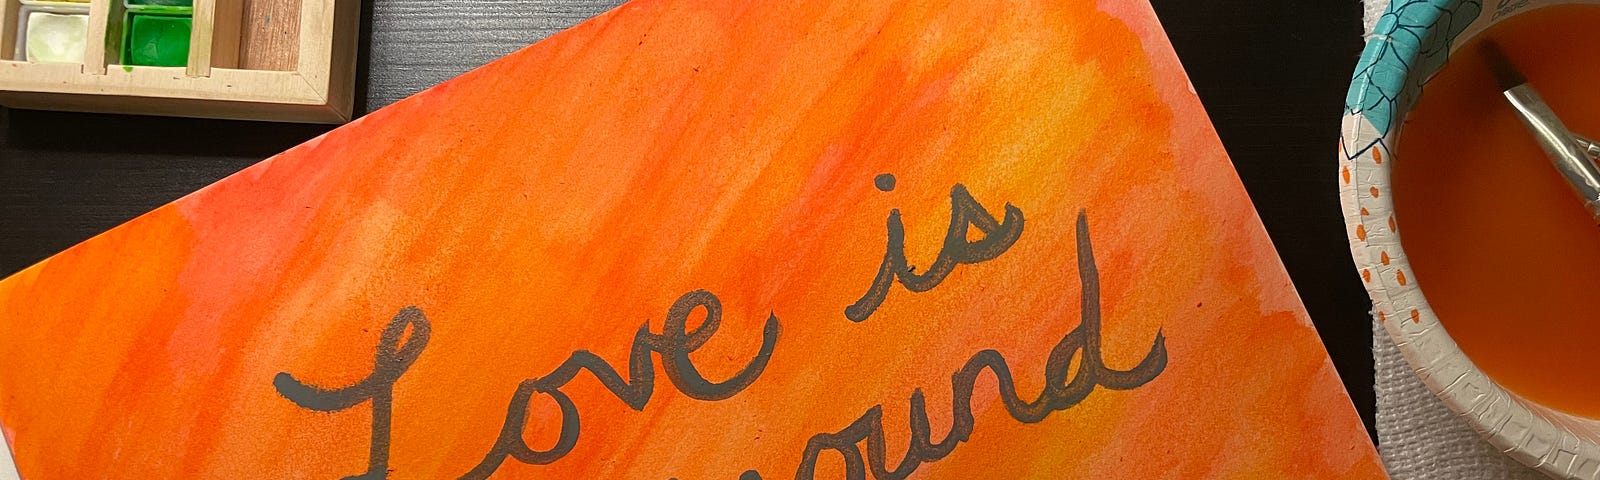 A watercolor painting that says “Love is all around me.” The background colors are red, yellow, and orange. A bowl full of water and a paintbrush are on the right side, atop a paper towel. An open palette of watercolors is to the left.